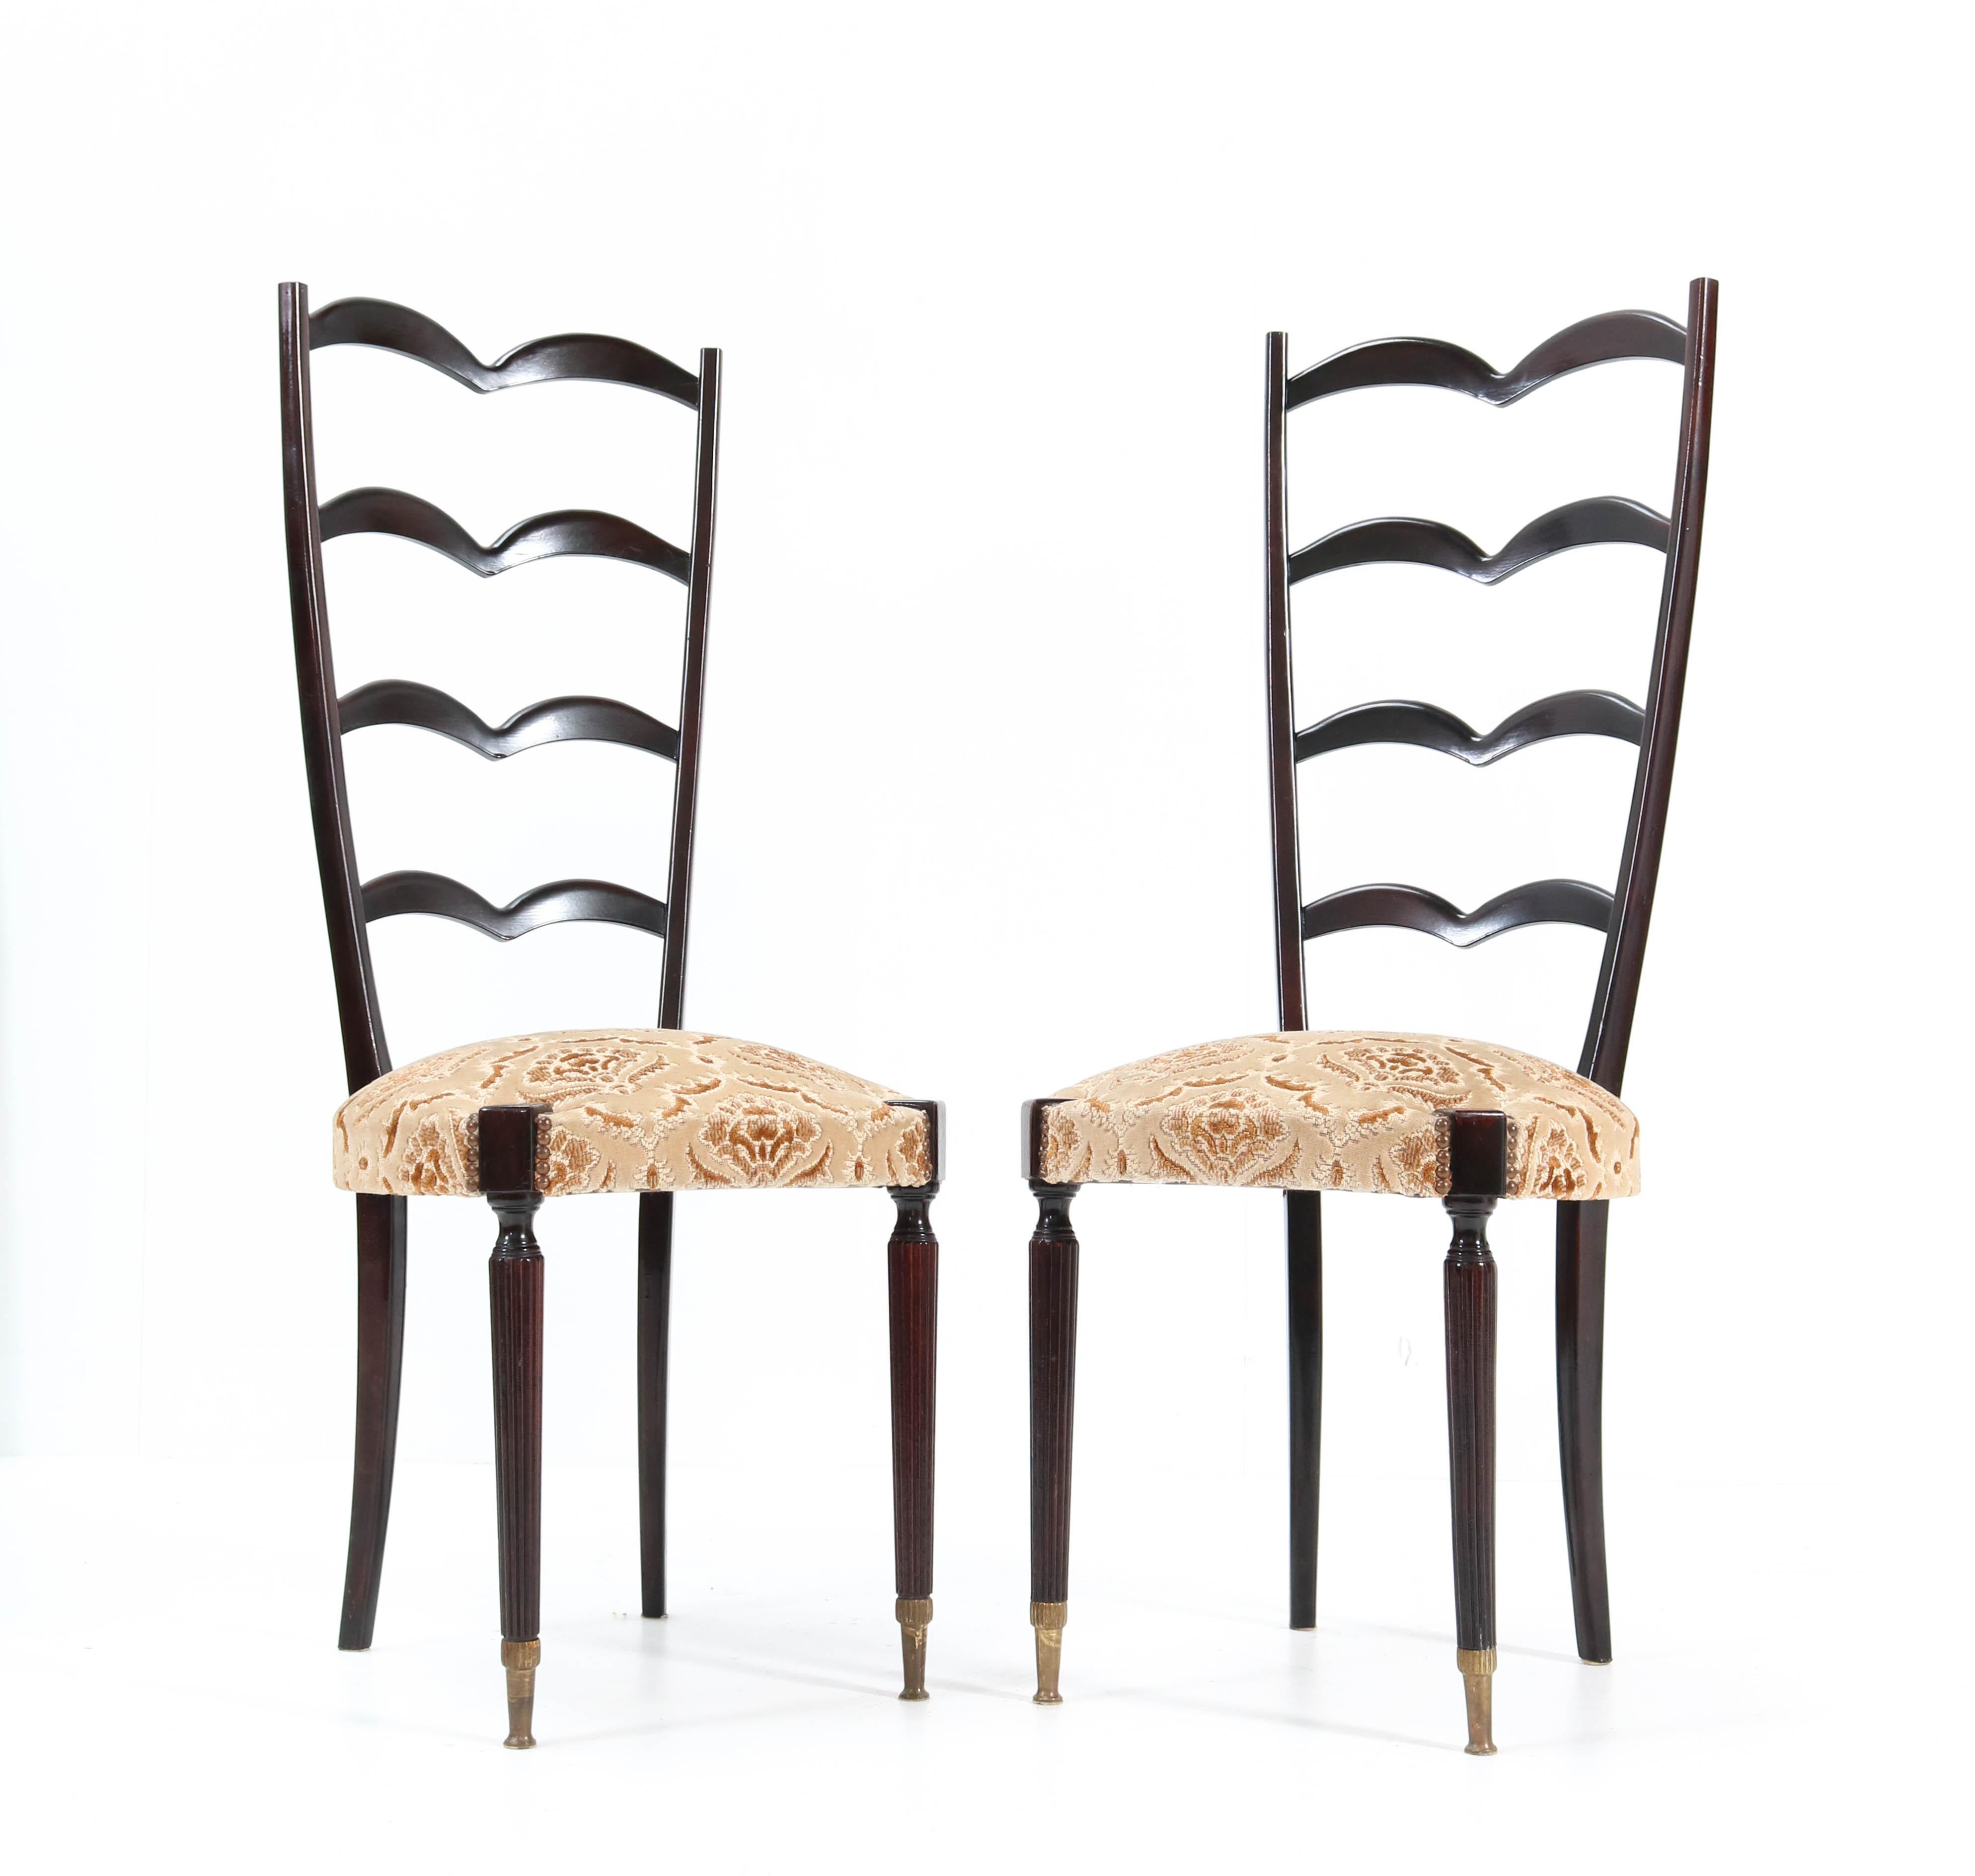 Italian Pair of Mid-Century Modern High Back Side Chairs Attributed to Paolo Buffa